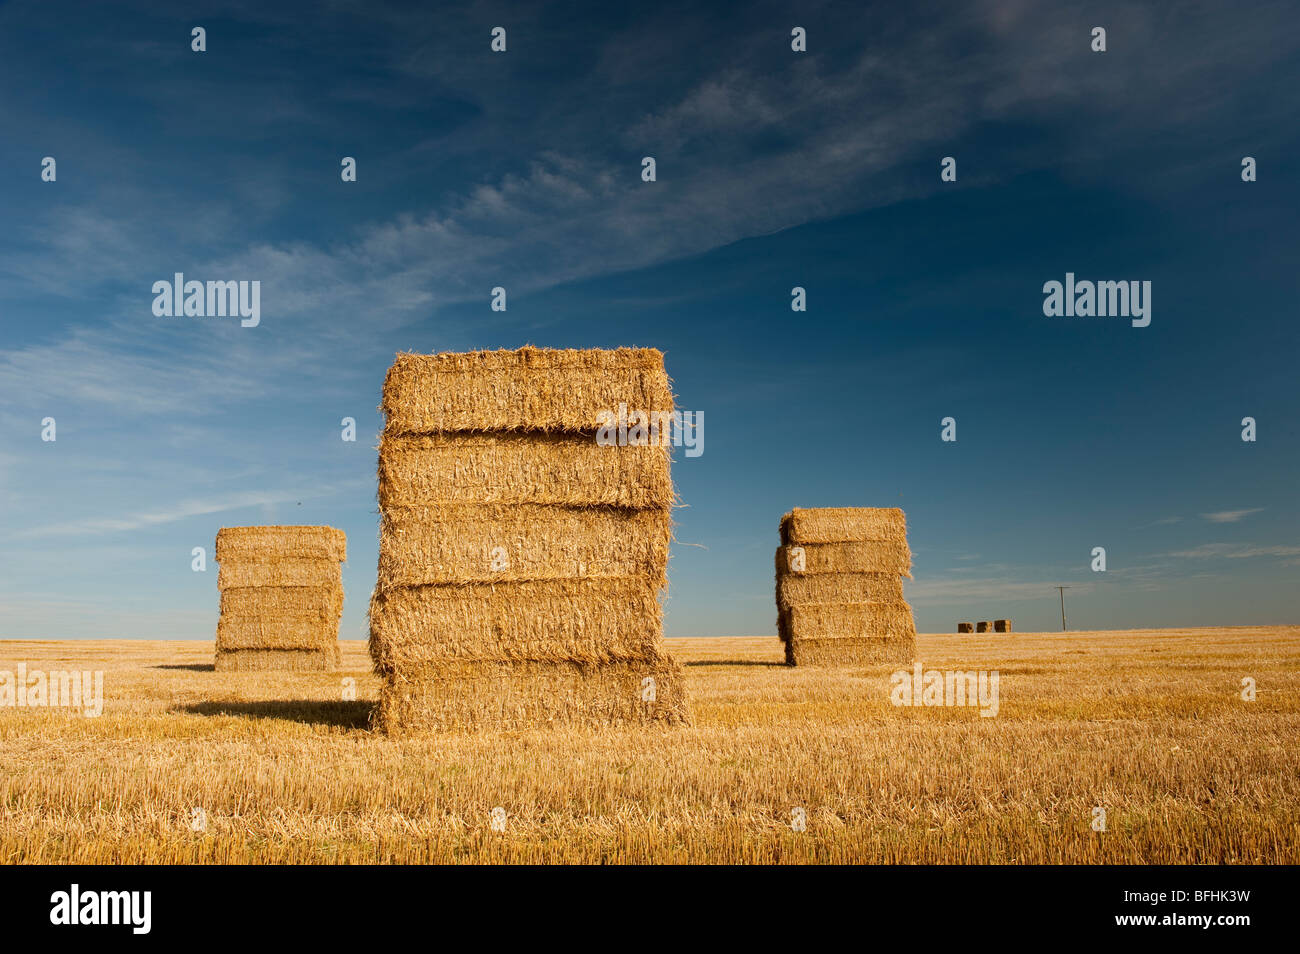 Big bales of Straw stacked on stubble field. Stock Photo